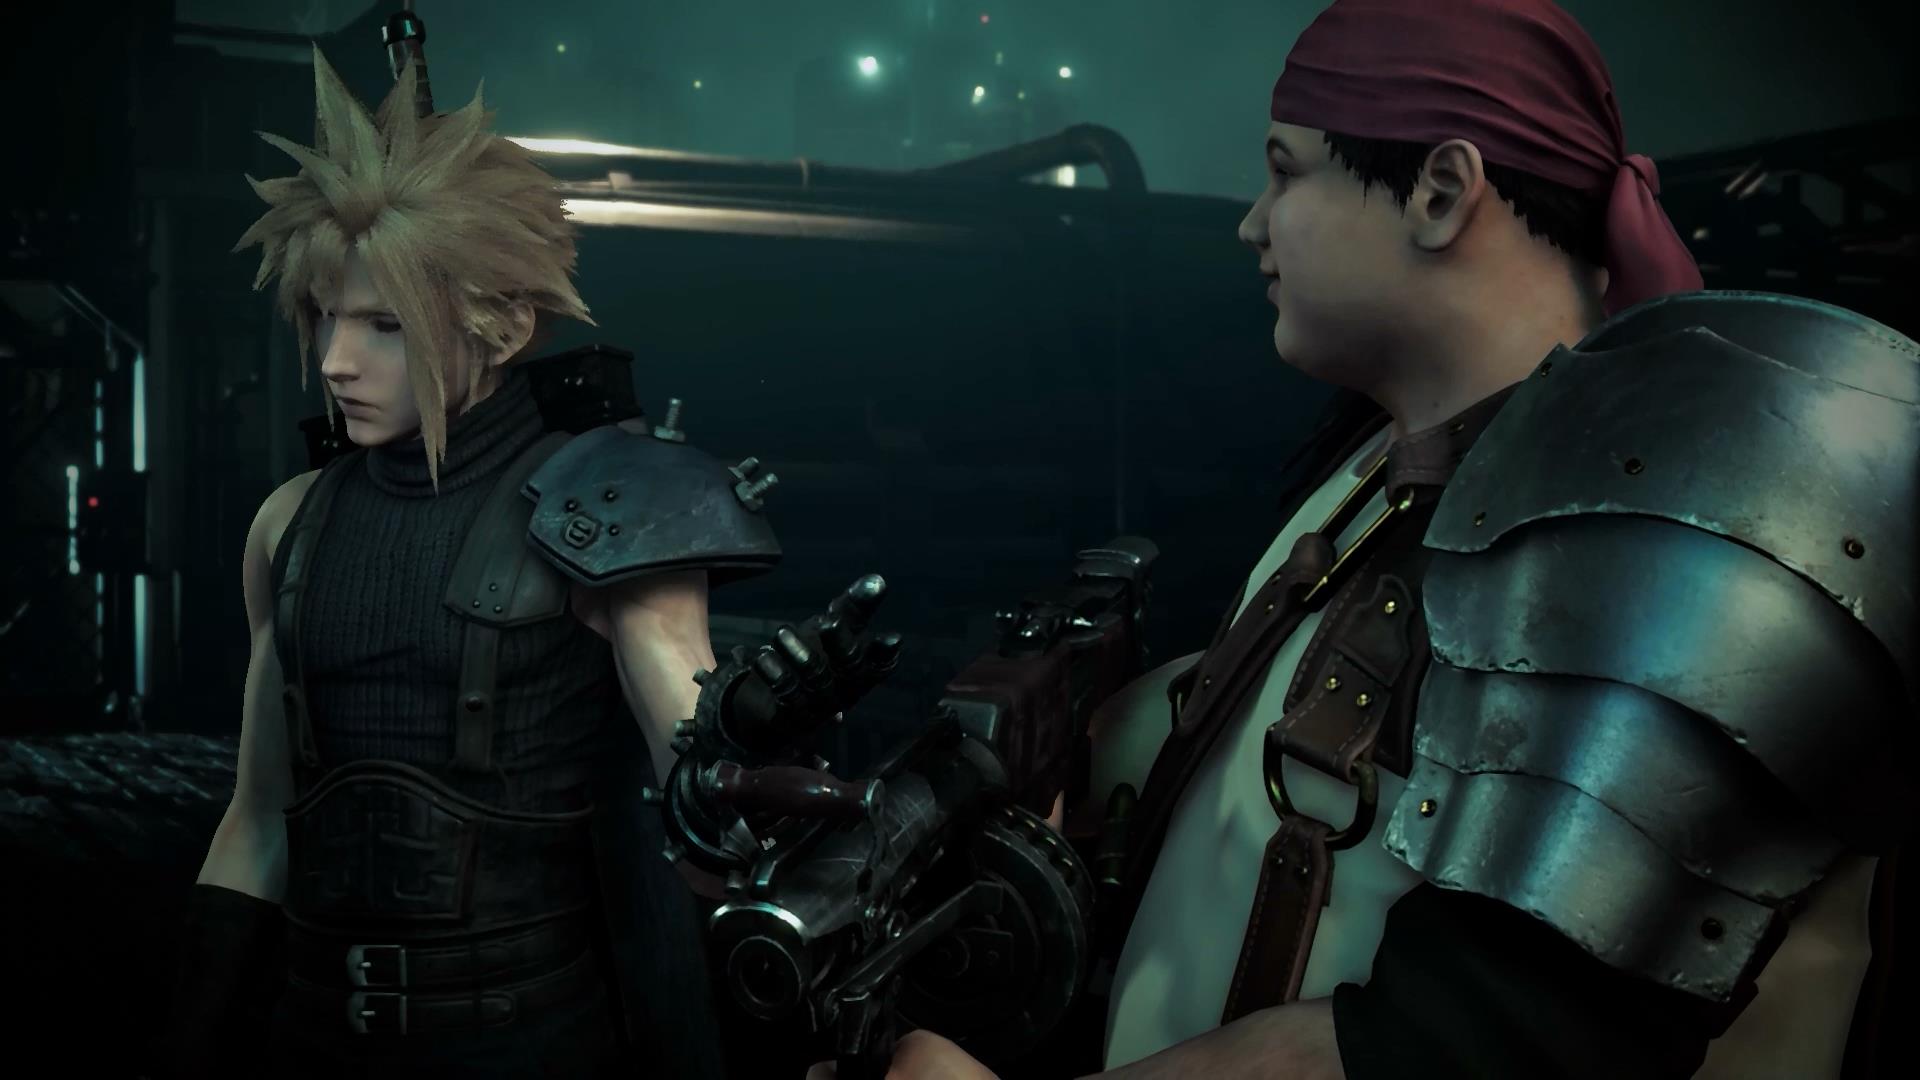 Final Fantasy VII Remake development team consists of mostly new developers...